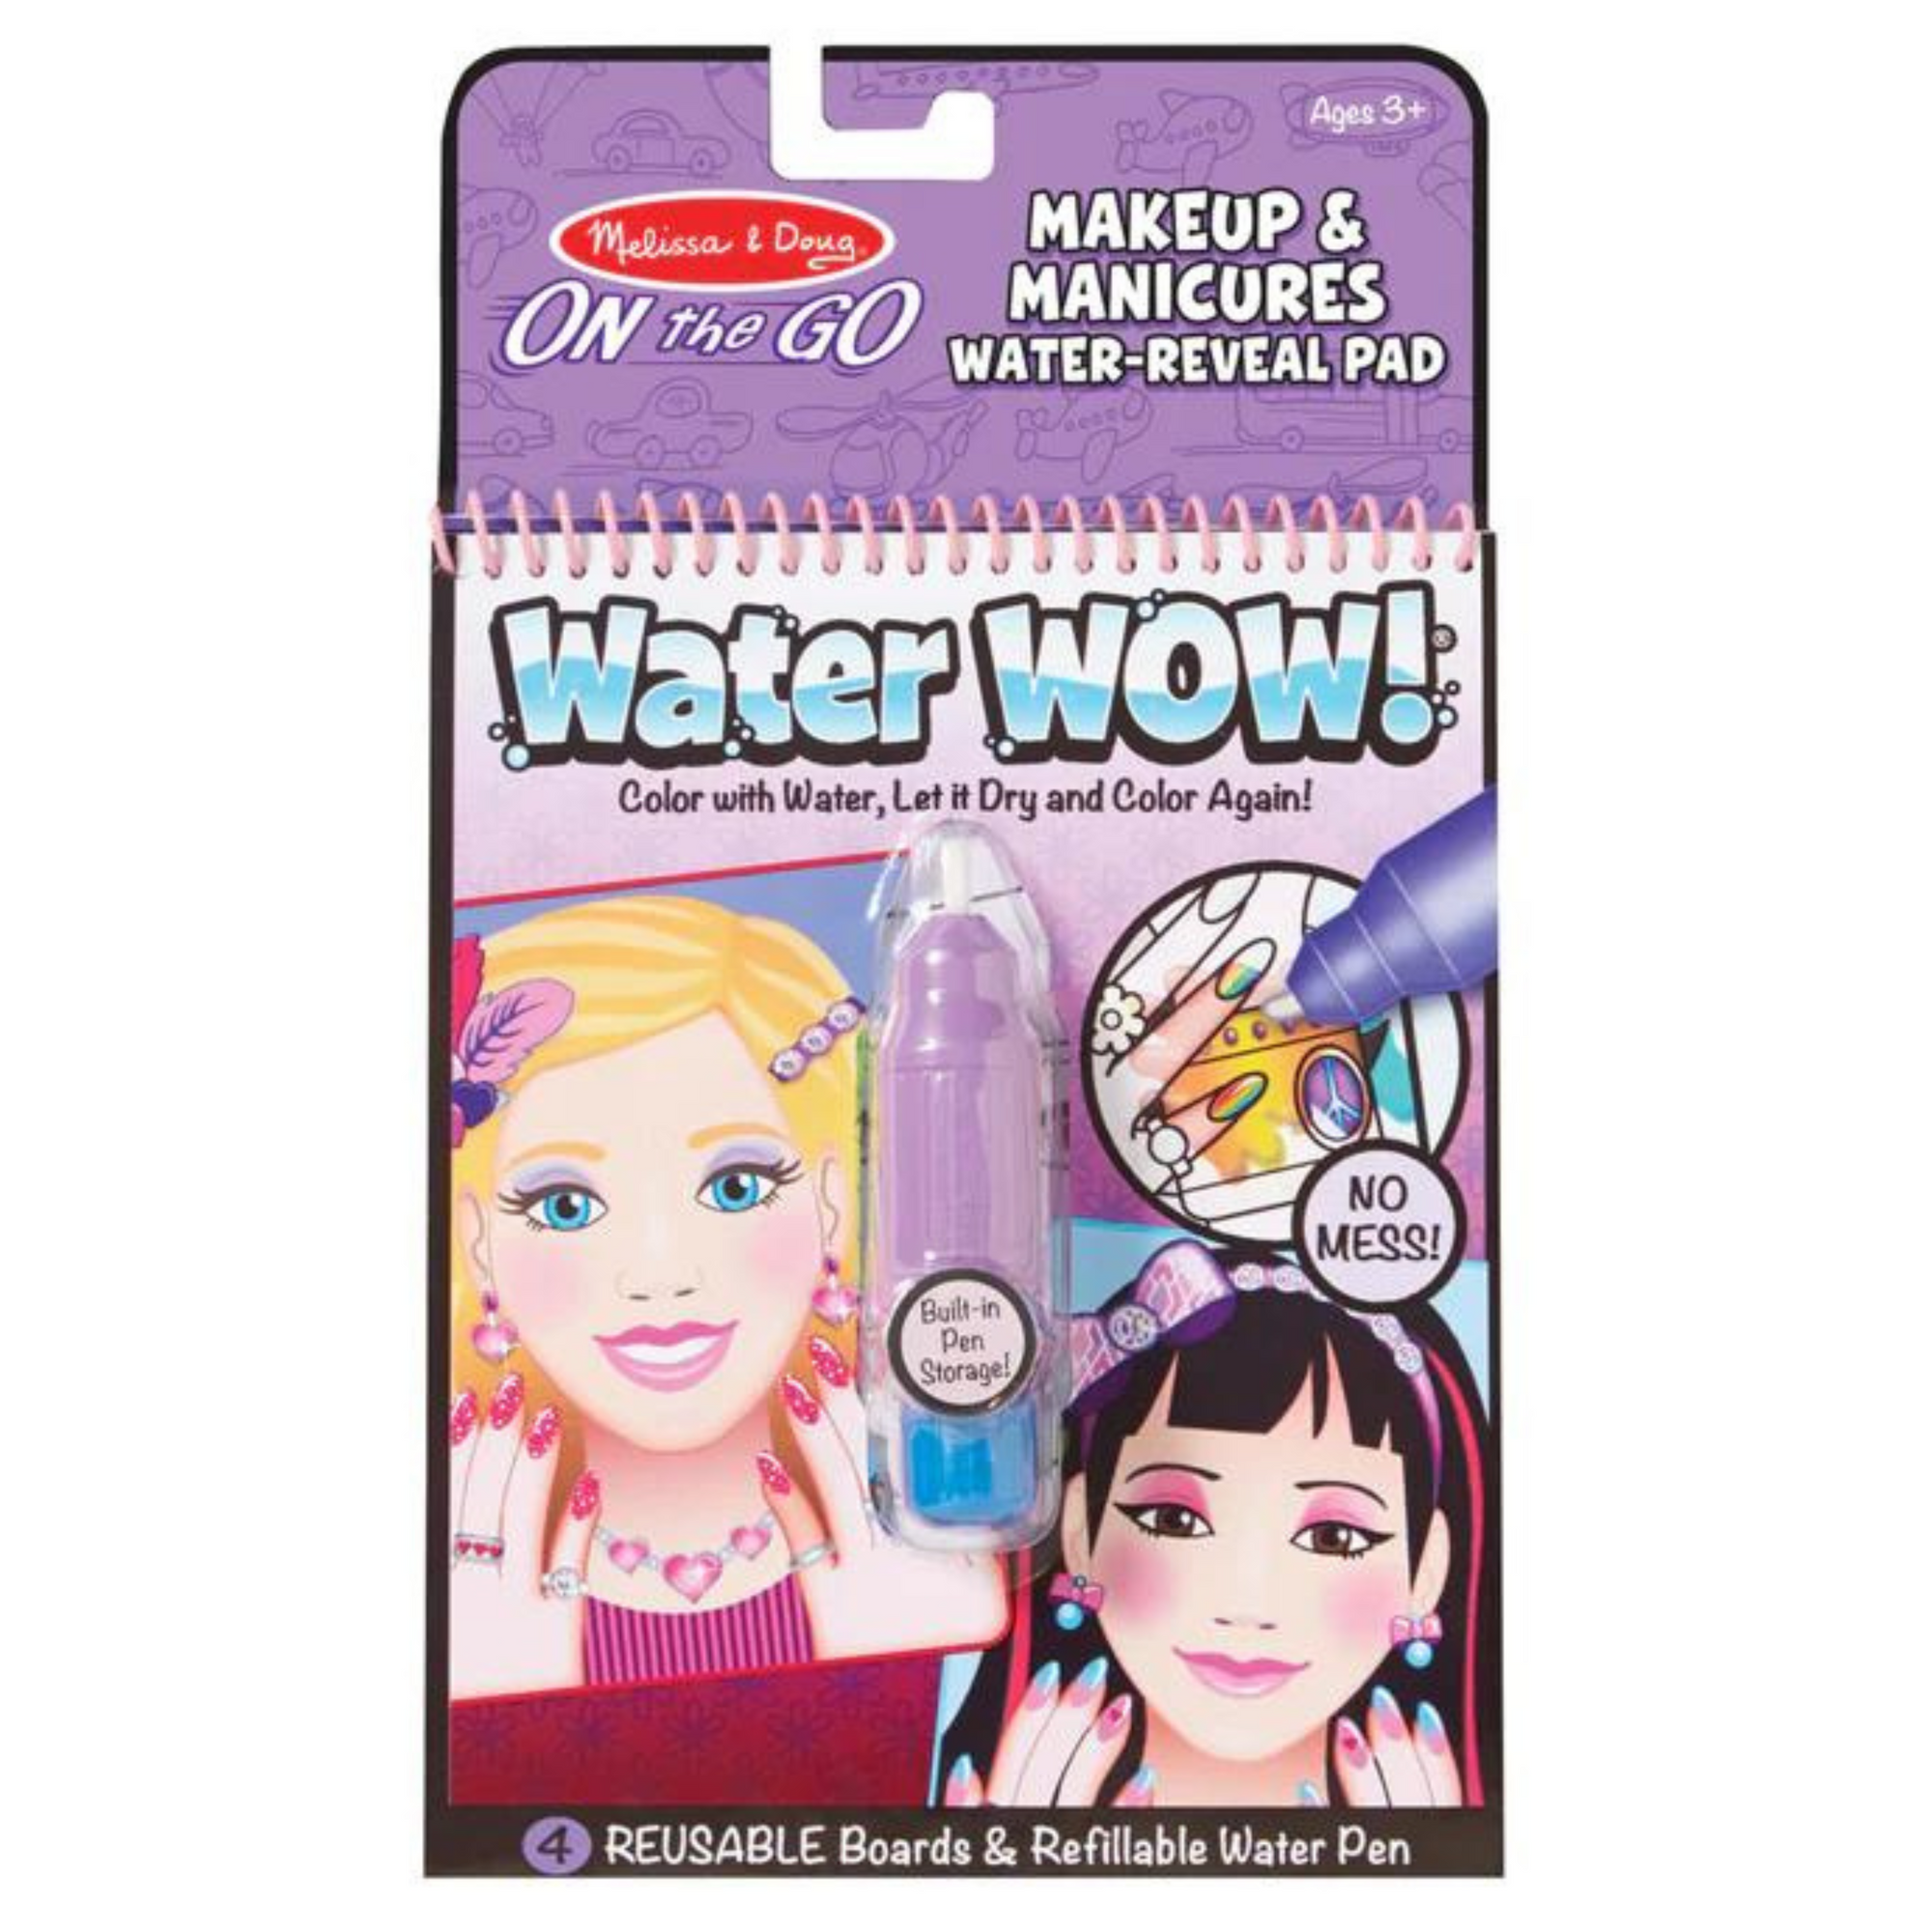 Water Wow maquillaje y manicure